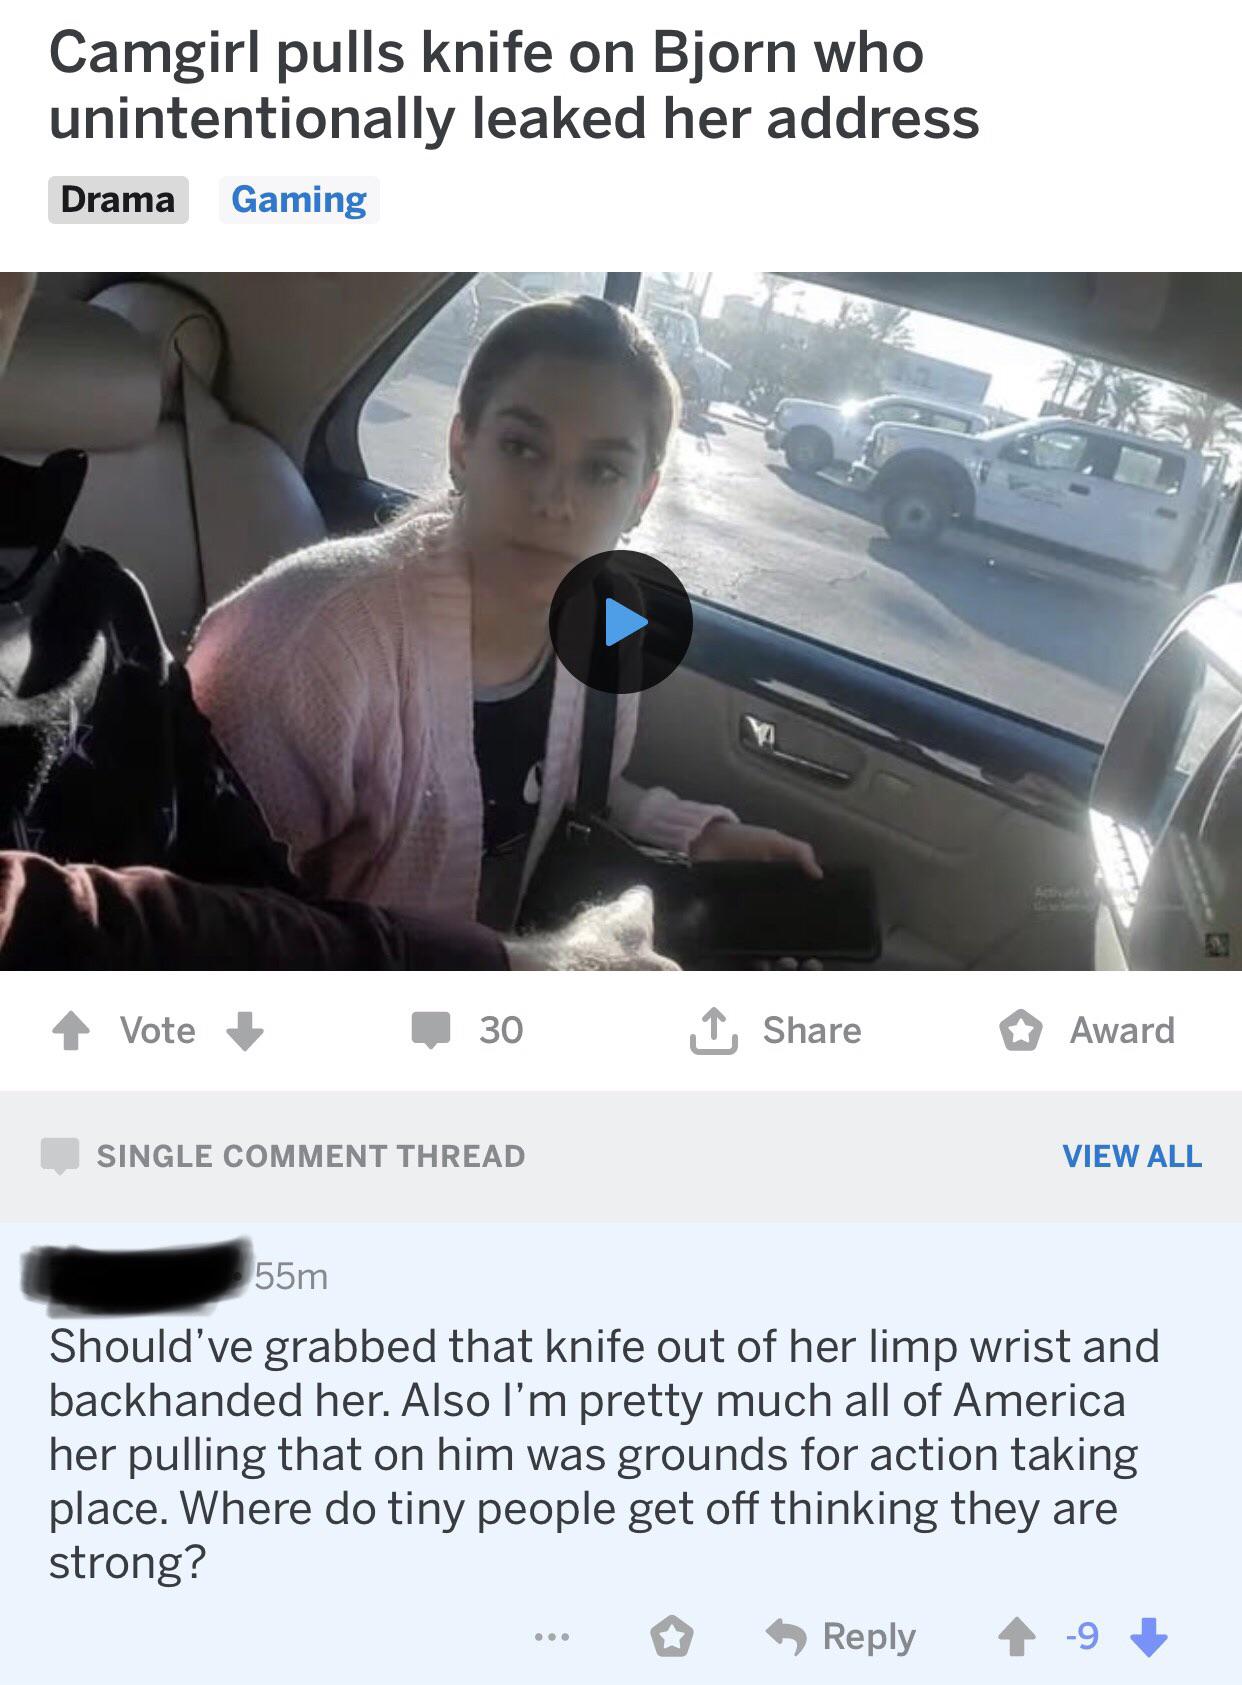 photo caption - Camgirl pulls knife on Bjorn who unintentionally leaked her address Drama Gaming Vote 30 1 Award Single Comment Thread View All 55m Should've grabbed that knife out of her limp wrist and backhanded her. Also I'm pretty much all of America 